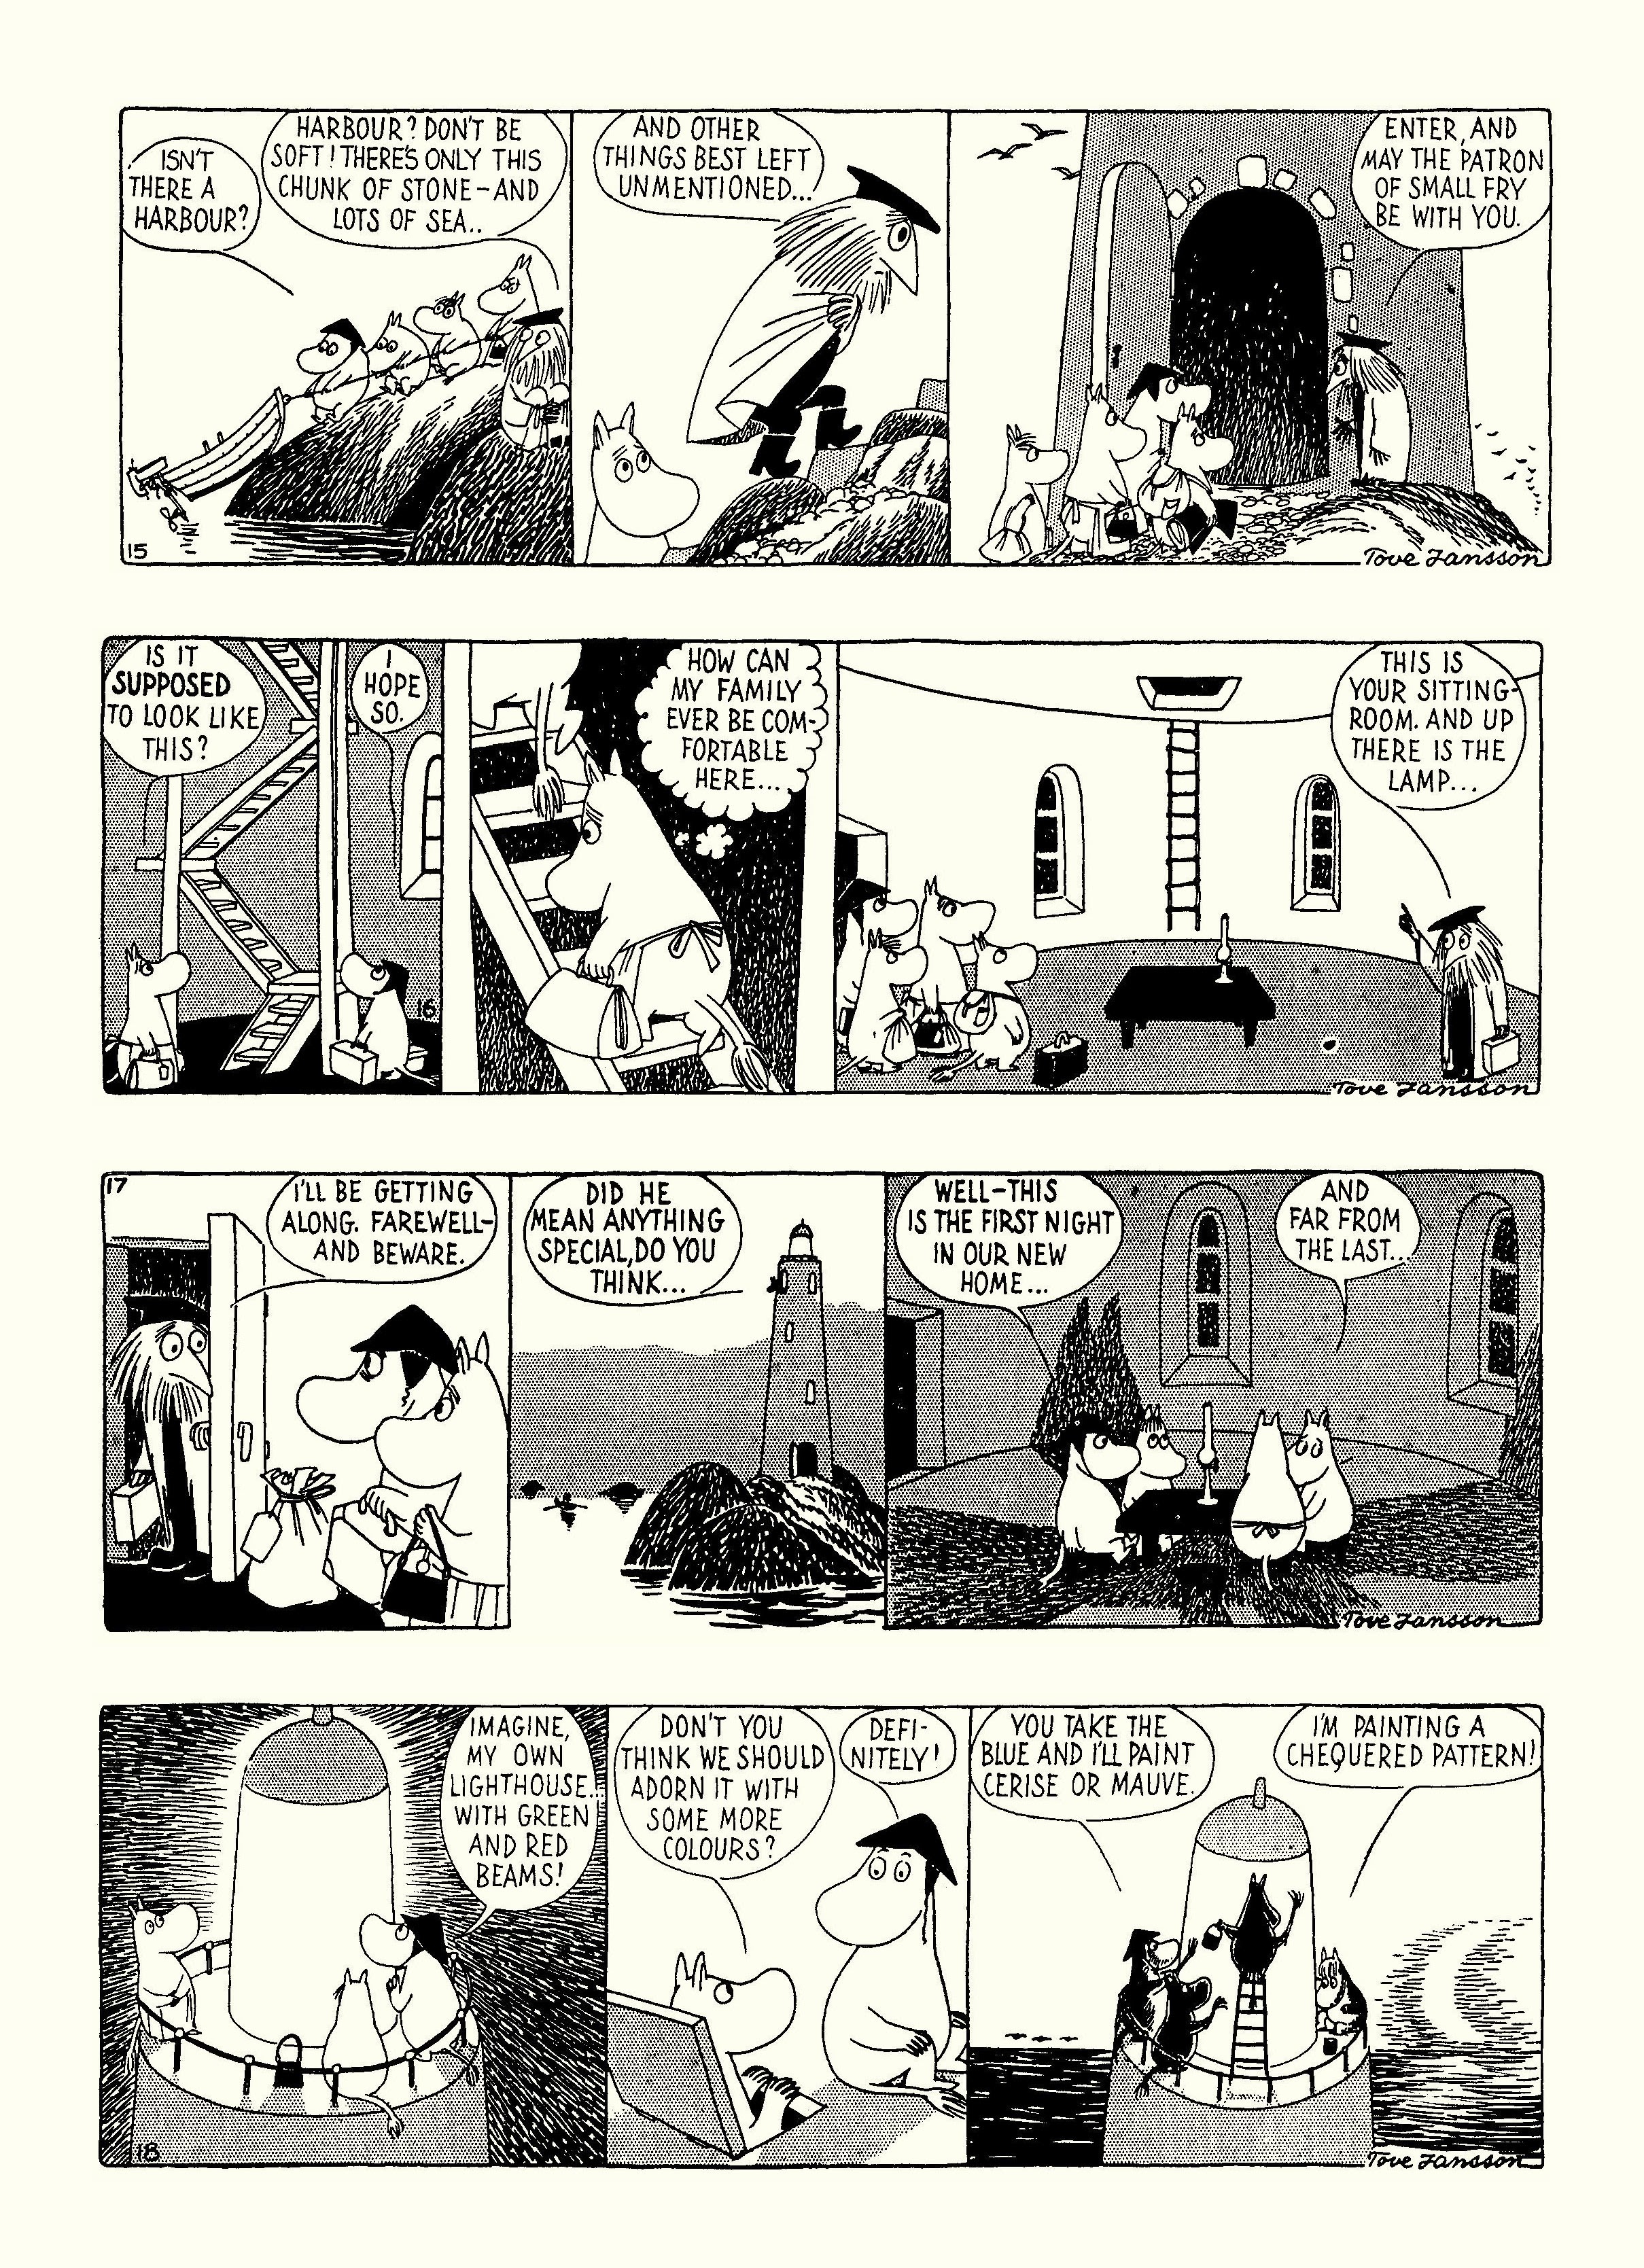 Read online Moomin: The Complete Tove Jansson Comic Strip comic -  Issue # TPB 3 - 59